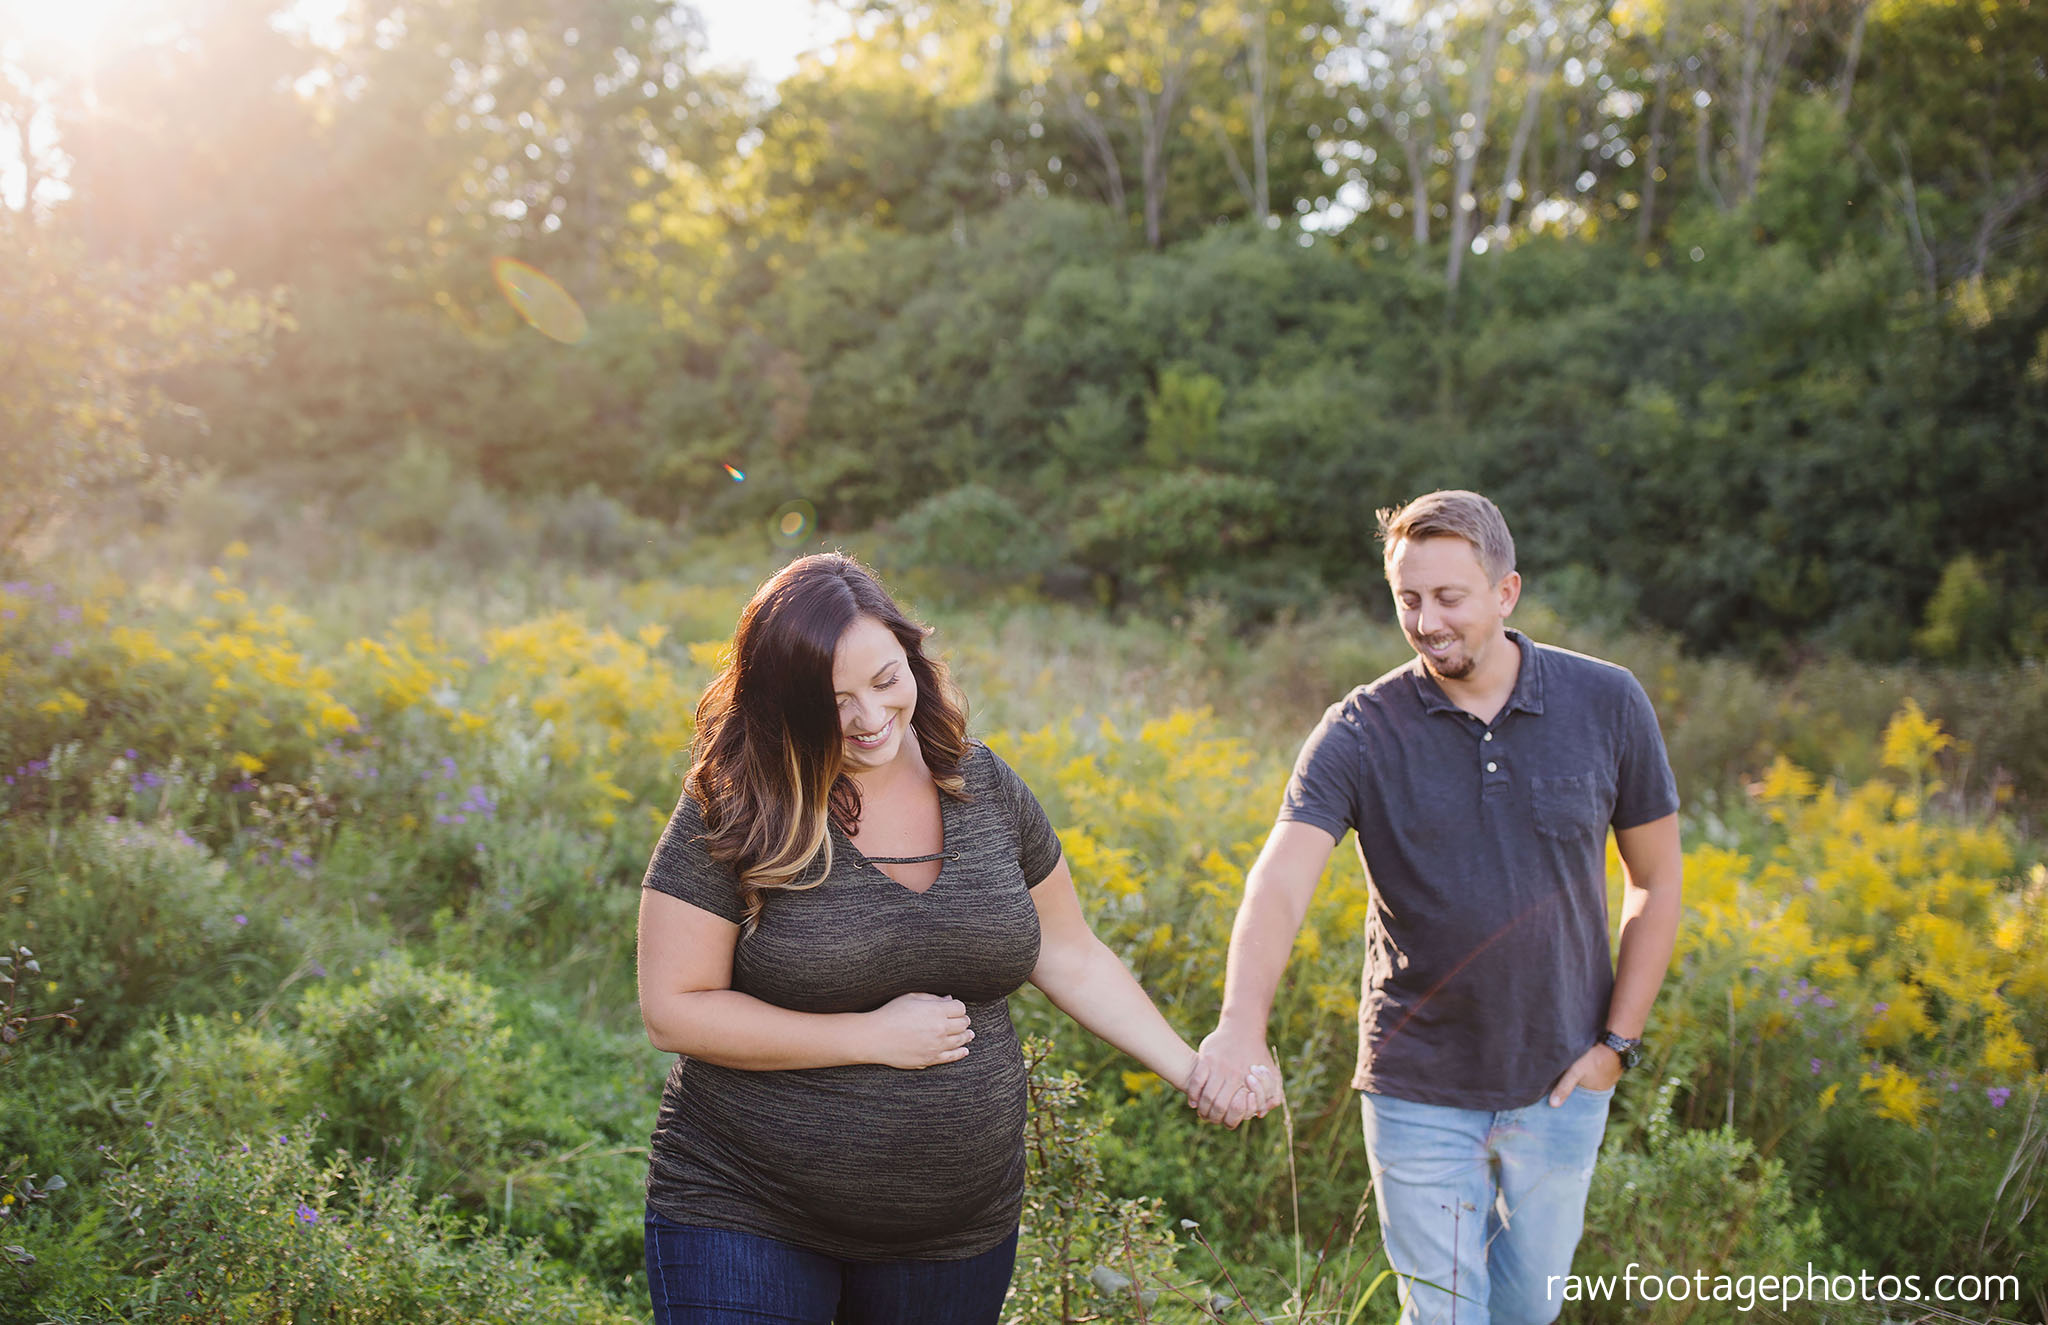 london_ontario_family_photography-lifestyle_photography-maternity_photos-raw_footage_photography-best_of_2018115.jpg